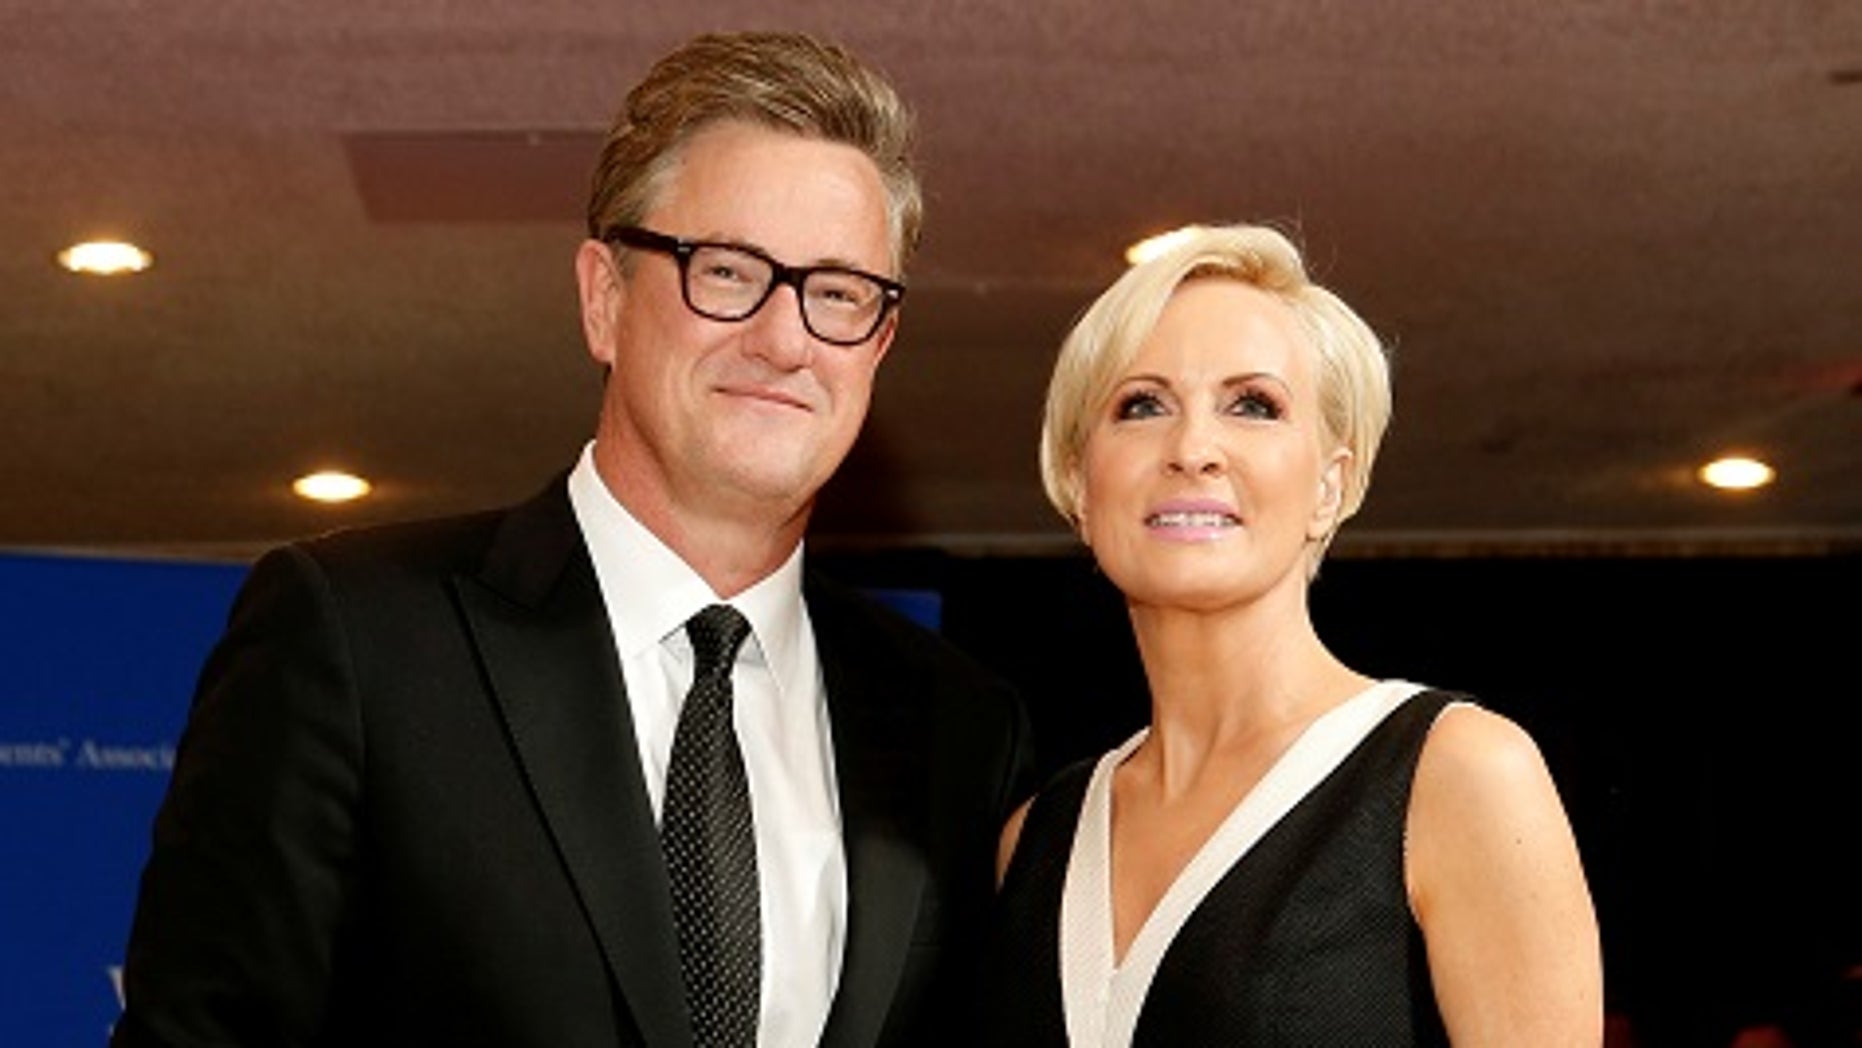 'Morning Joe's' Mika and Joe's star-studded engagement party included Trump imitator ...